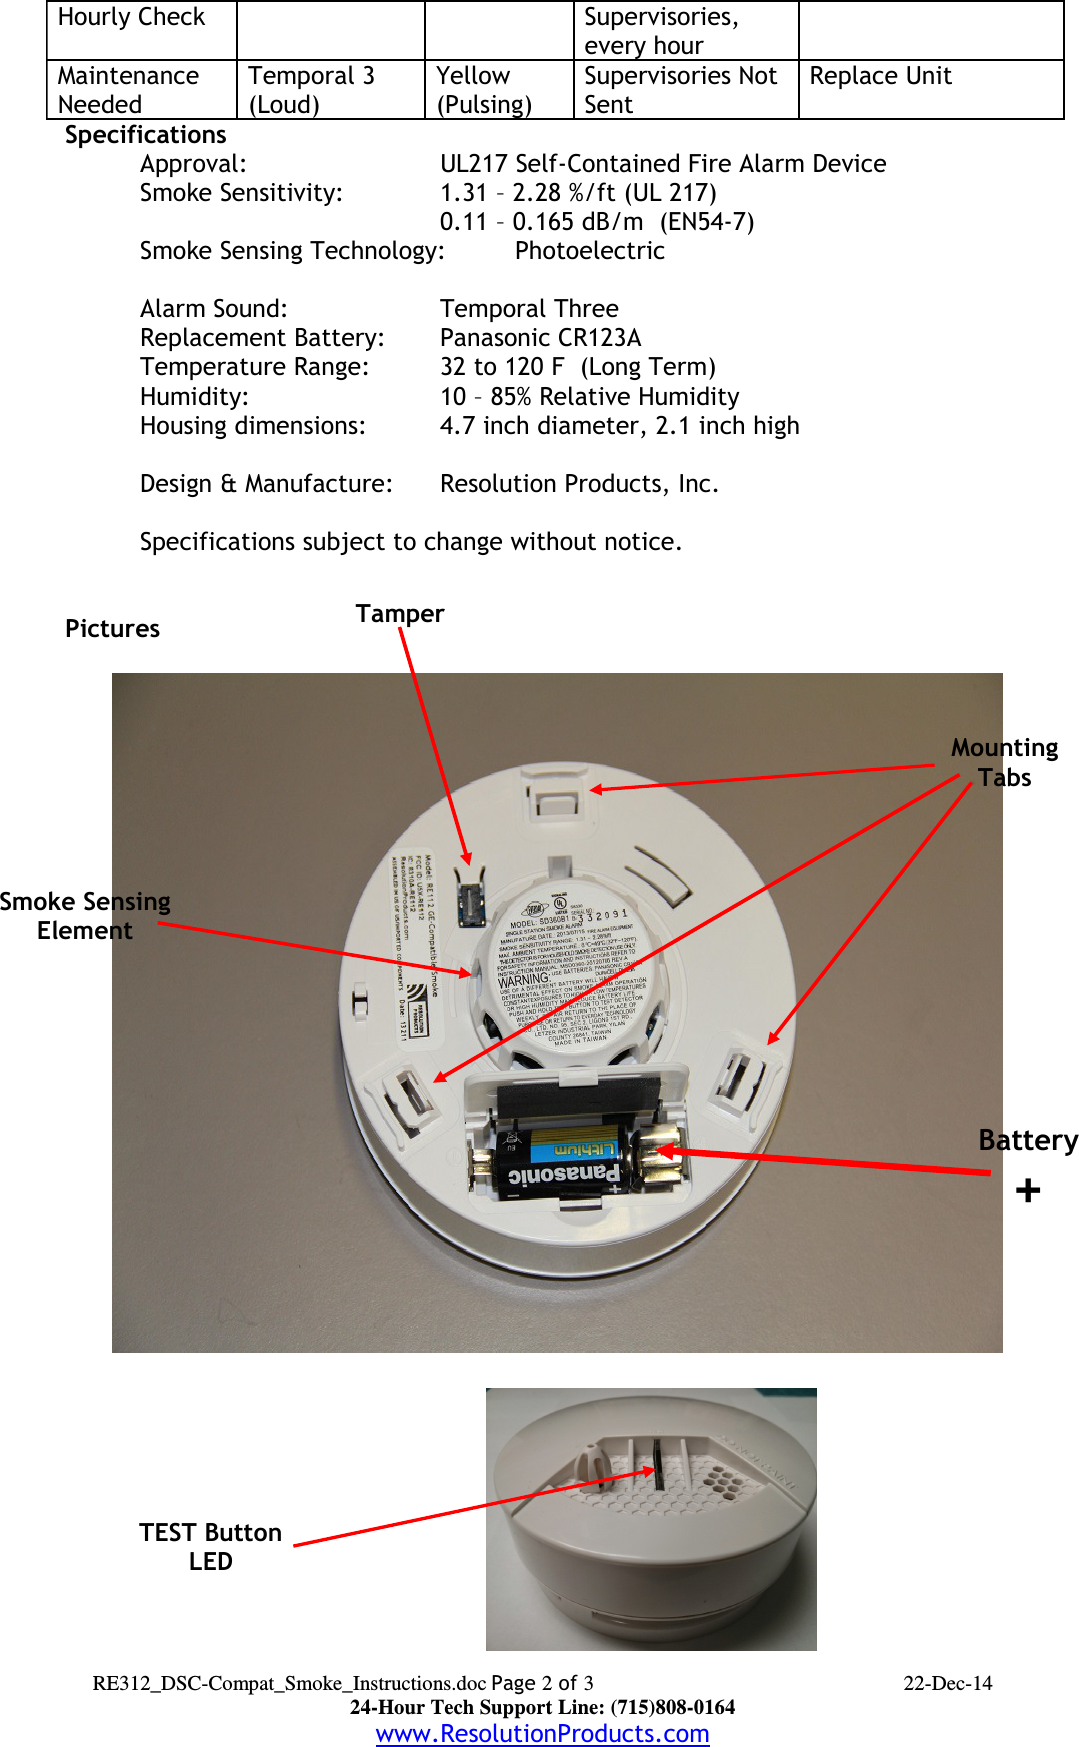 Hourly Check Supervisories, every hourMaintenance NeededTemporal 3(Loud)Yellow (Pulsing)Supervisories Not SentReplace UnitSpecifications  Approval: UL217 Self-Contained Fire Alarm DeviceSmoke Sensitivity:   1.31 – 2.28 %/ft (UL 217)0.11 – 0.165 dB/m  (EN54-7)Smoke Sensing Technology: PhotoelectricHeat Alarm Point: 135 – 149 F  (UL 521)Alarm Sound: Temporal ThreeReplacement Battery: Panasonic CR123ATemperature Range: 32 to 120 F  (Long Term)Humidity: 10 – 85% Relative HumidityHousing dimensions: 4.7 inch diameter, 2.1 inch highDesign &amp; Manufacture:  Resolution Products, Inc.Specifications subject to change without notice.PicturesRE312_DSC-Compat_Smoke_Instructions.doc Page 2 of 3 22-Dec-1424-Hour Tech Support Line: (715)808-0164www.ResolutionProducts.comTEST ButtonLEDBattery+Smoke SensingElementMountingTabsTamper